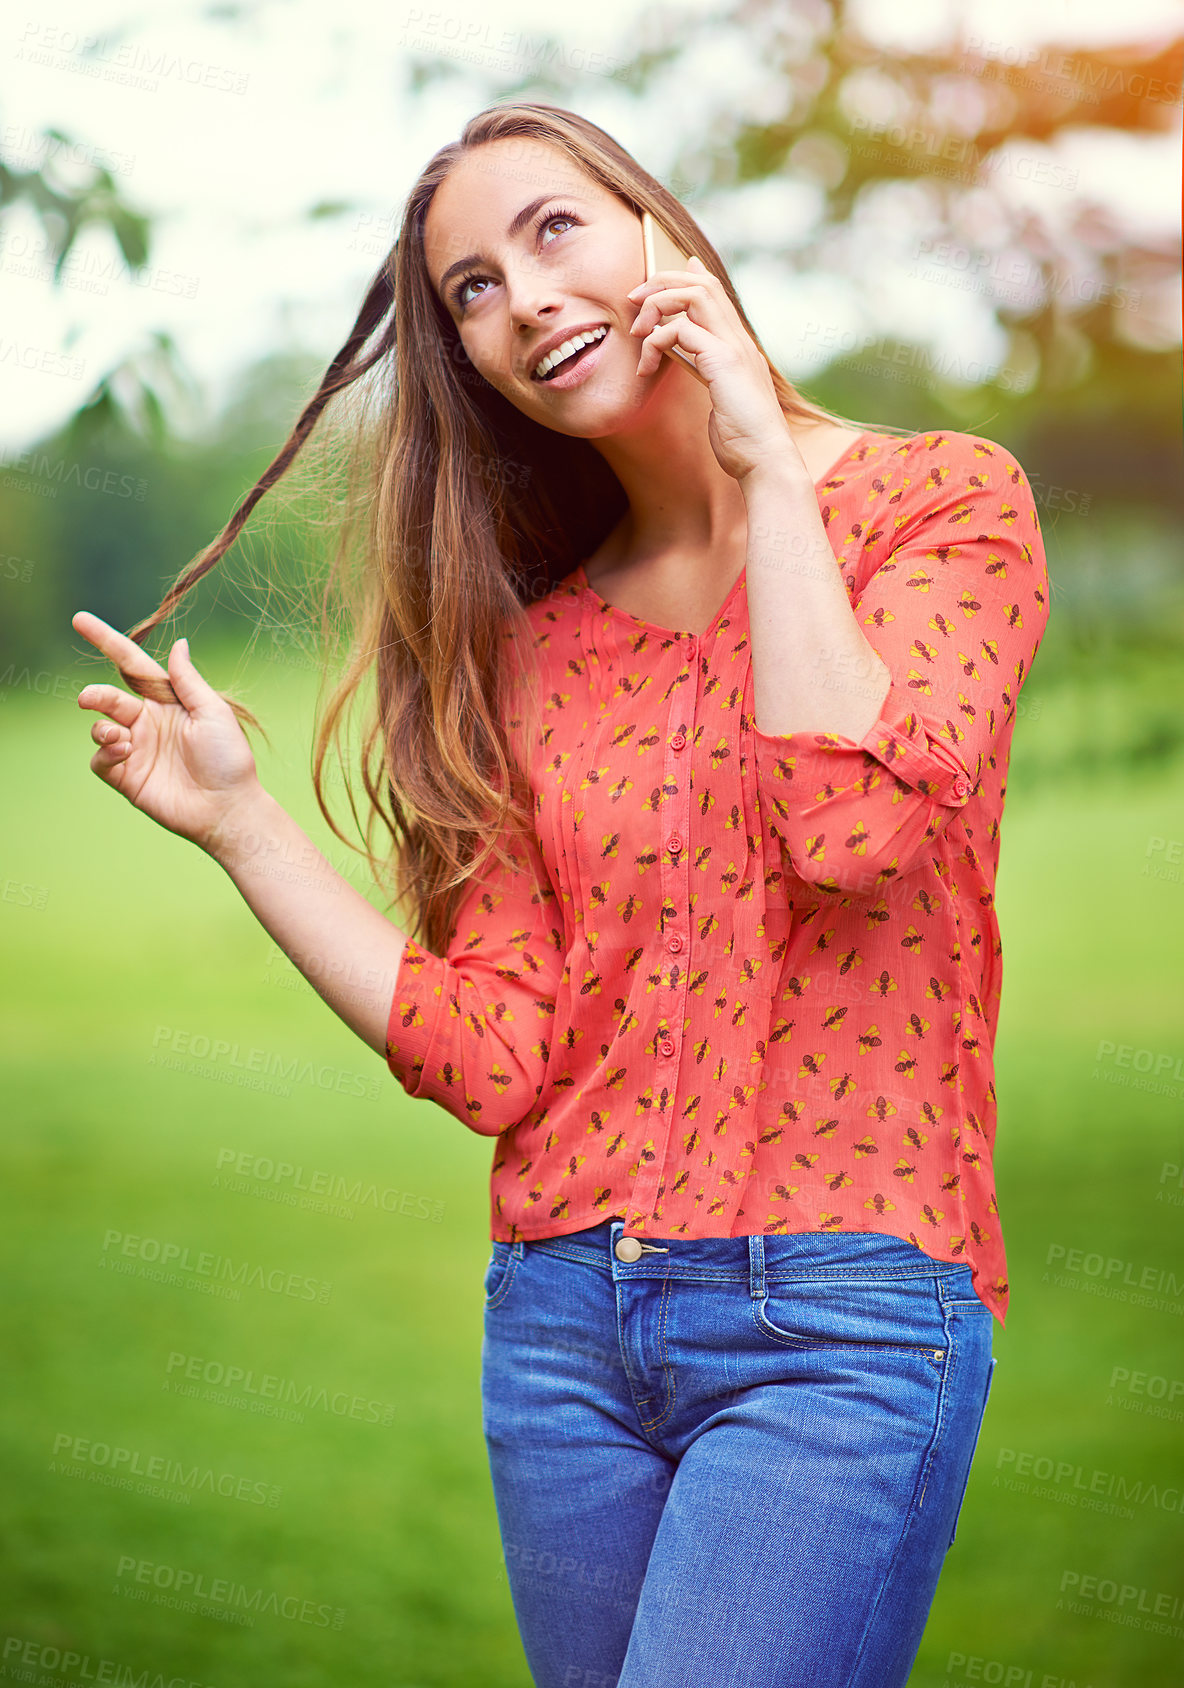 Buy stock photo Shot of a young woman twirling her hair while talking on her cellphone outside